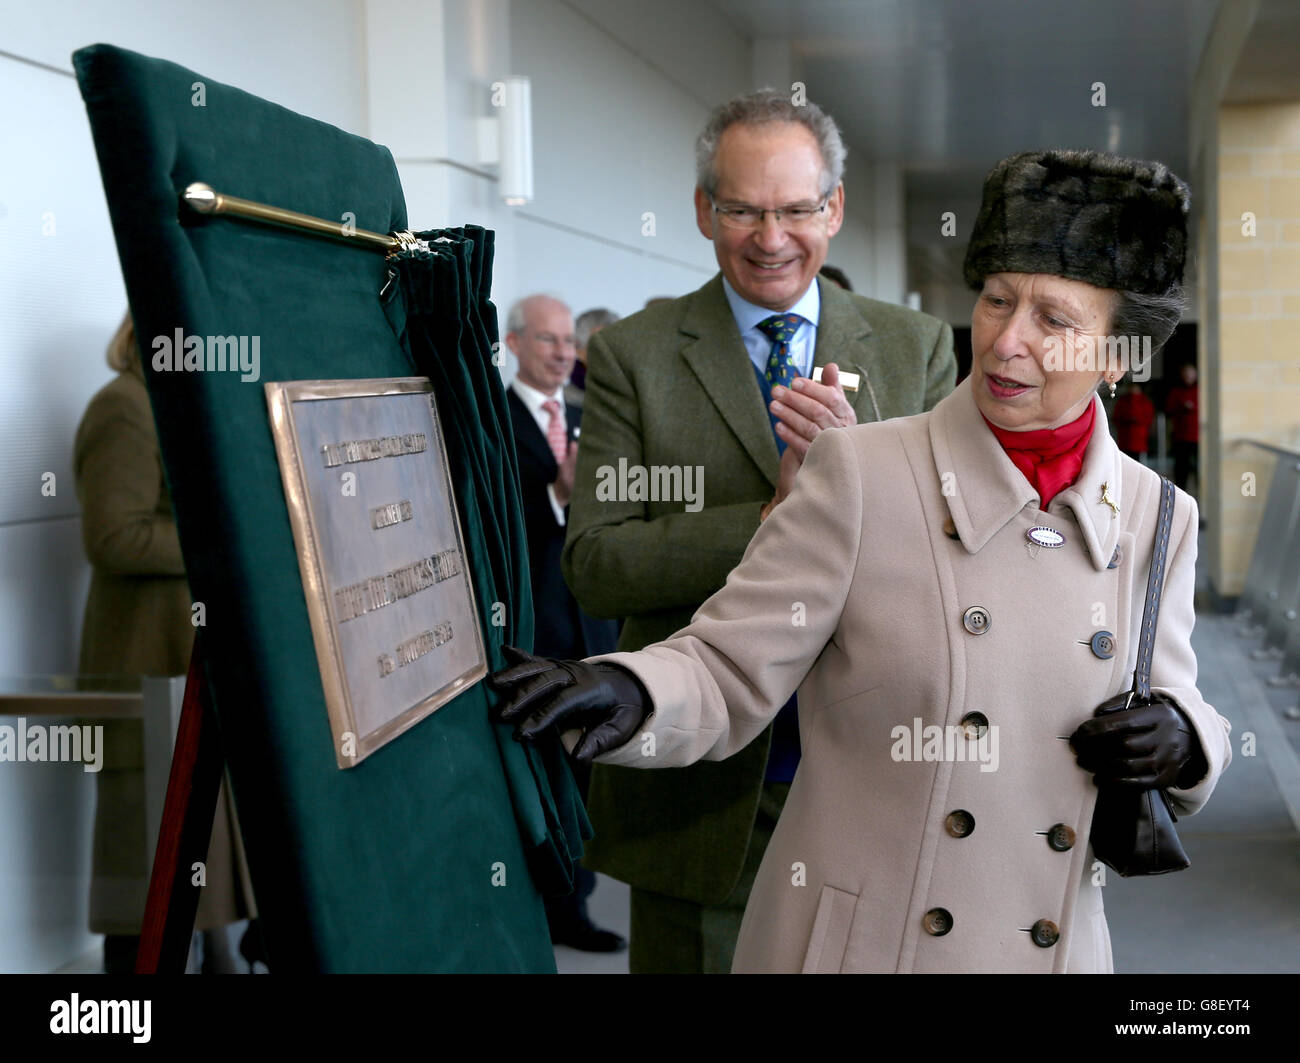 Princess Anne officially opens The Princess Royal Grandstand during day one of The Open at Cheltenham racecourse, Cheltenham. Stock Photo